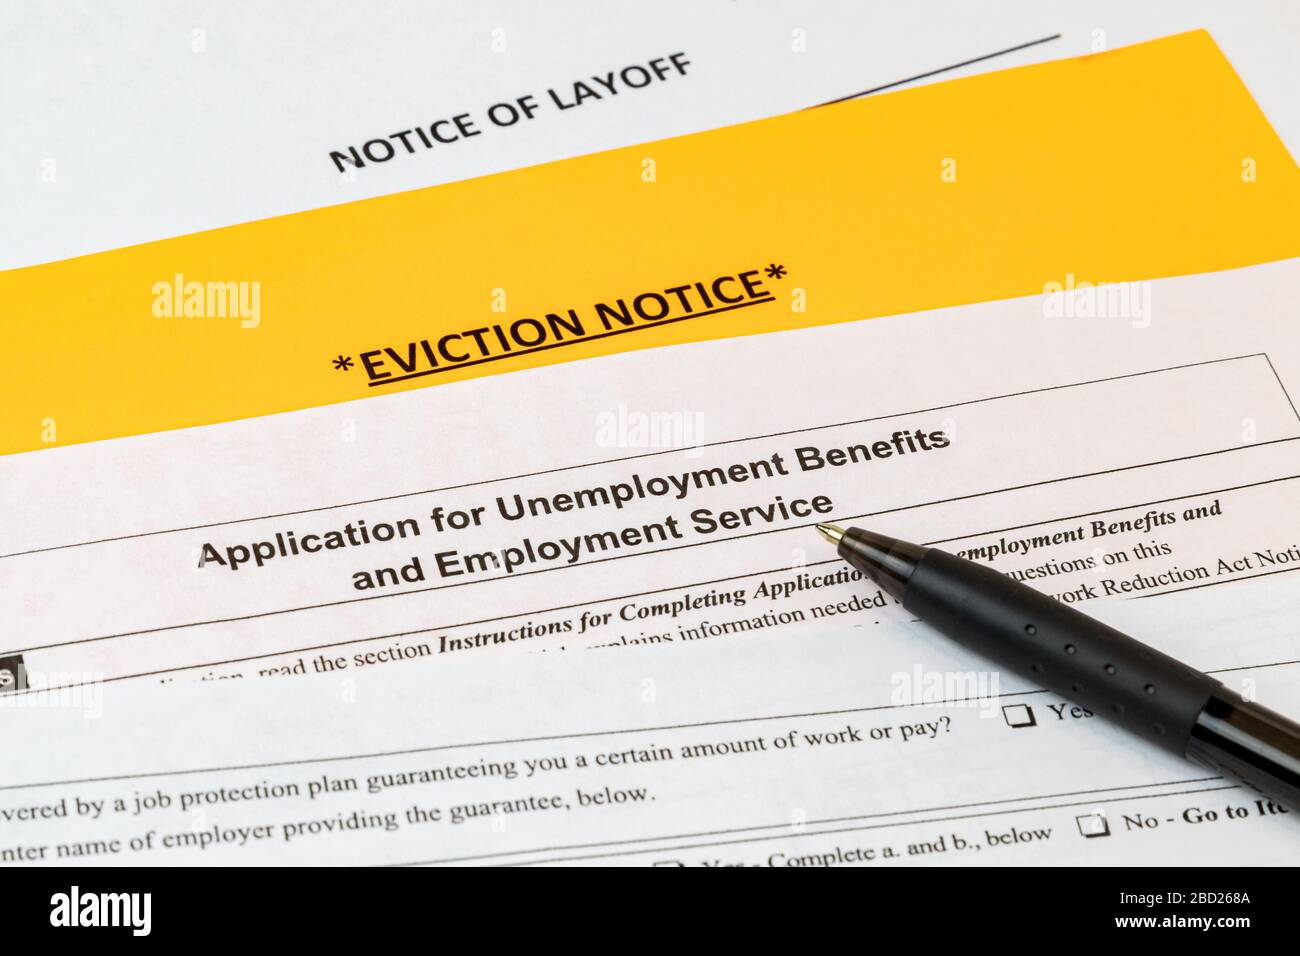 Job layoff notice, application for unemployment insurance benefits, eviction notice. Covid-19 coronavirus stay at home order effect on economy Stock Photo